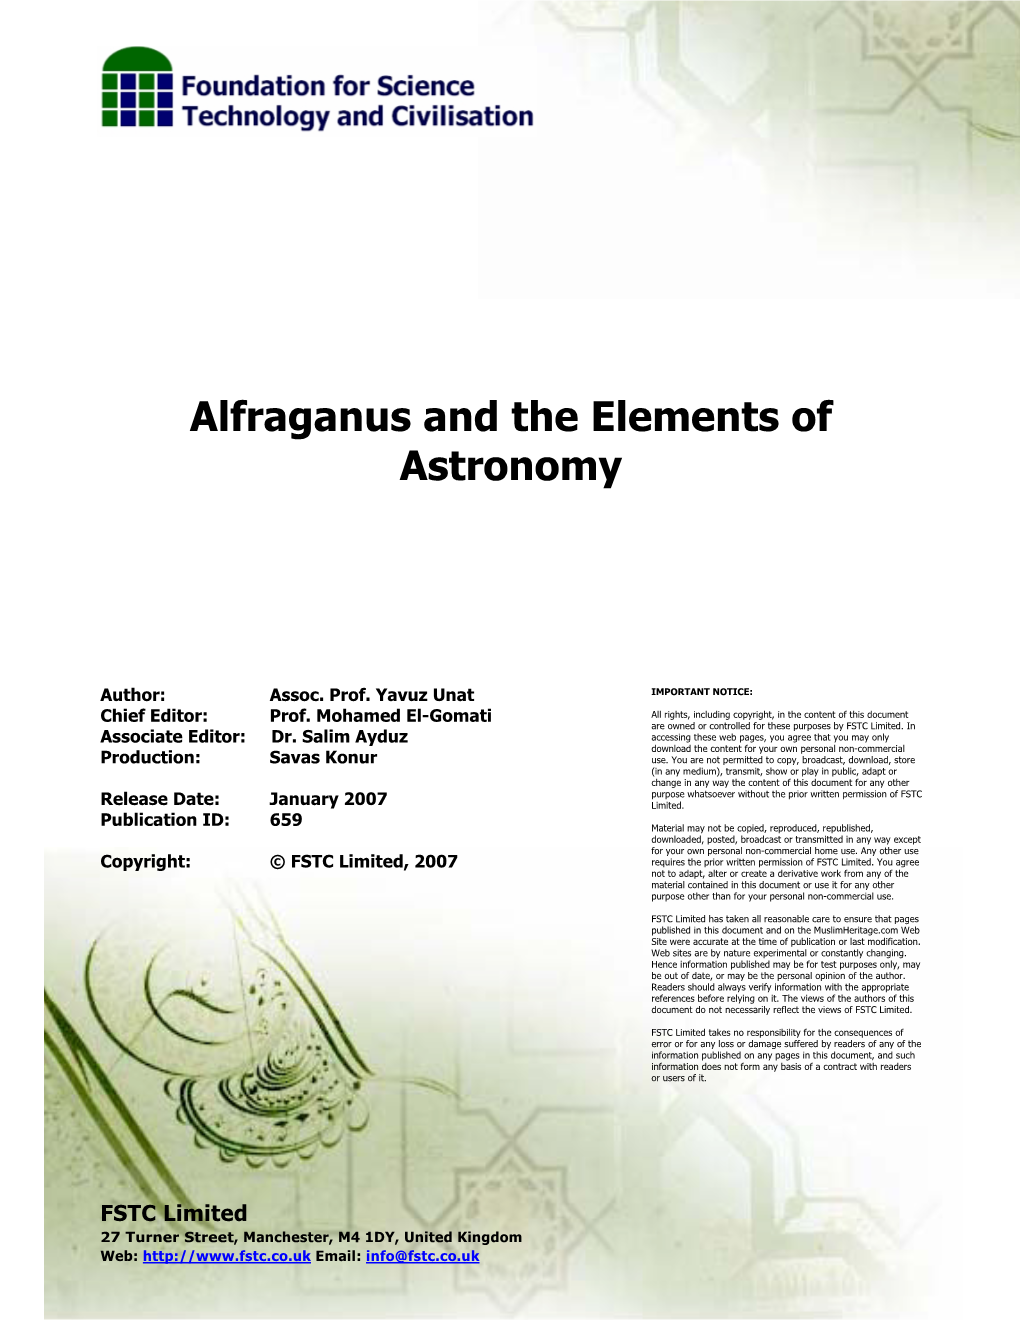 Alfraganus and the Elements of Astronomy